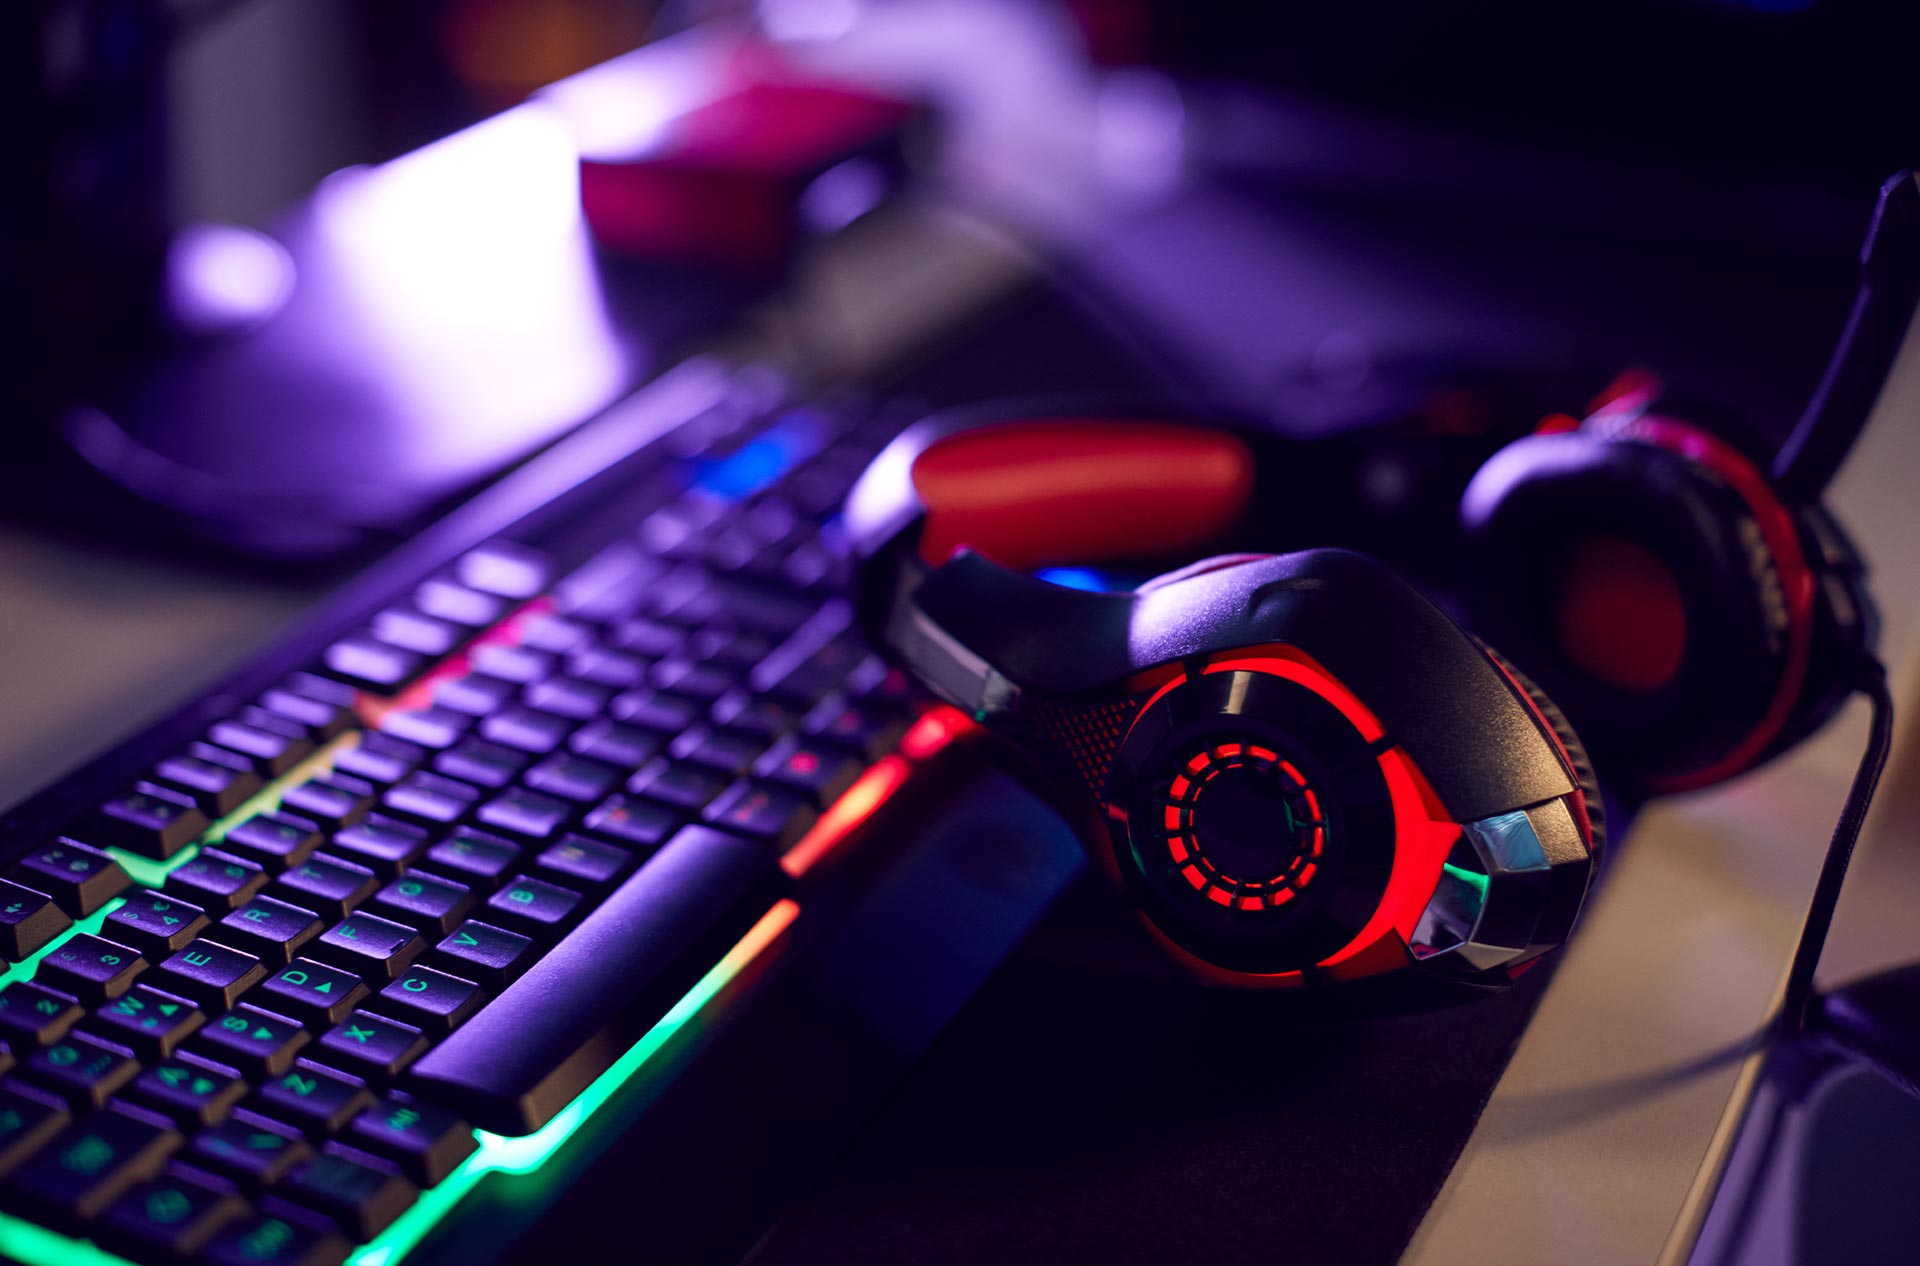 Image of a gaming keyboard and headset